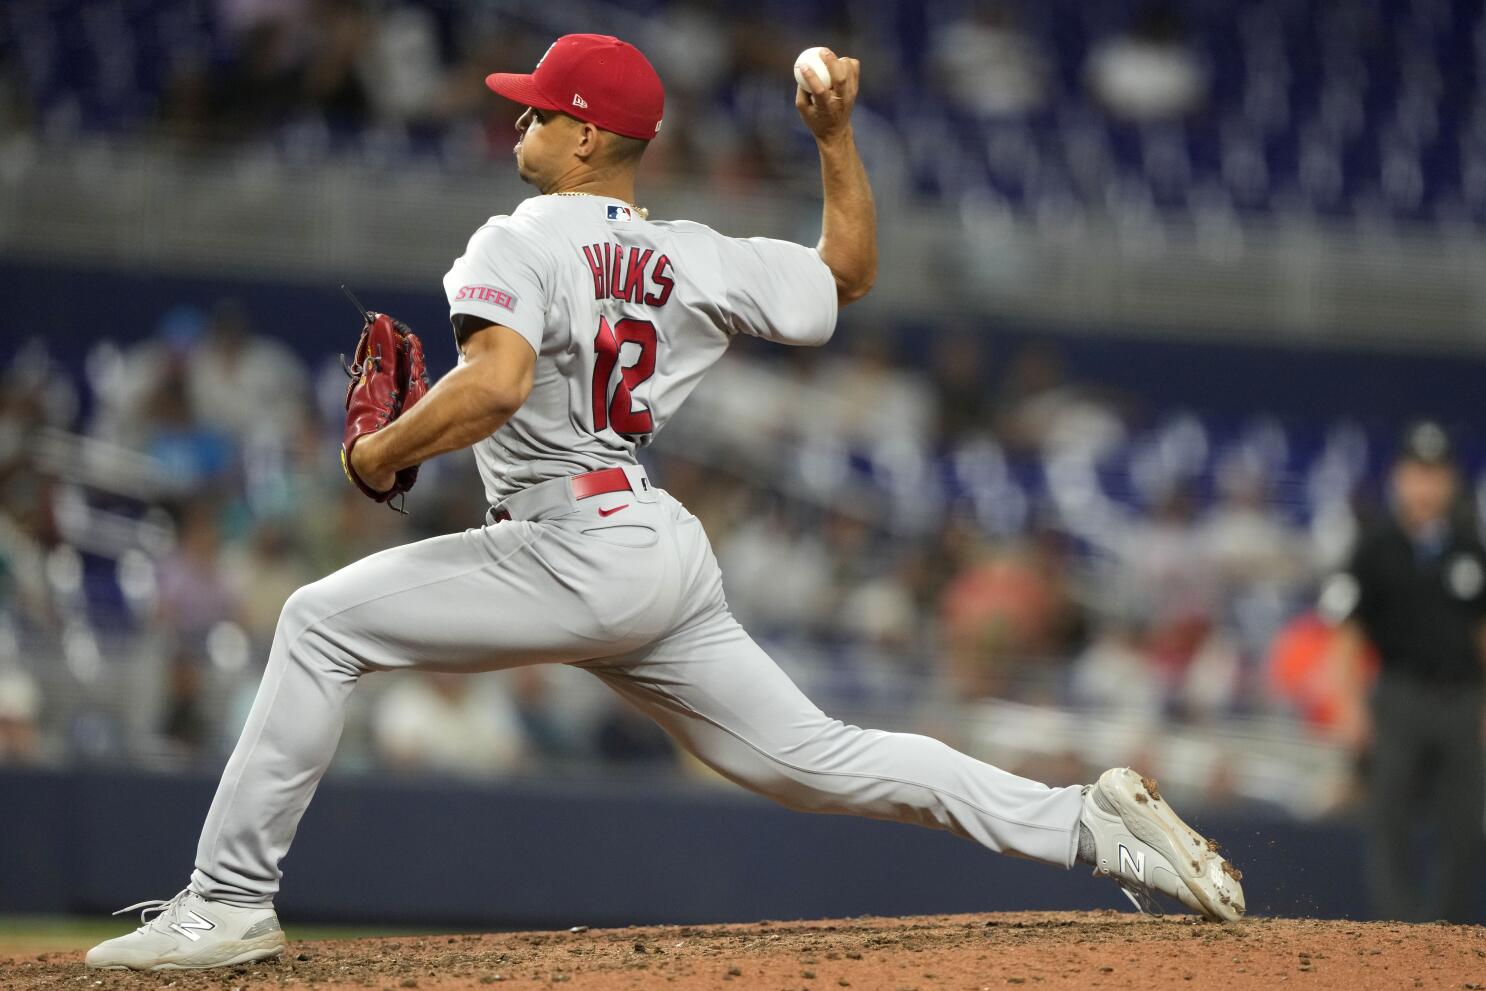 Blue Jays acquire reliever Jordan Hicks from Cardinals: Why St